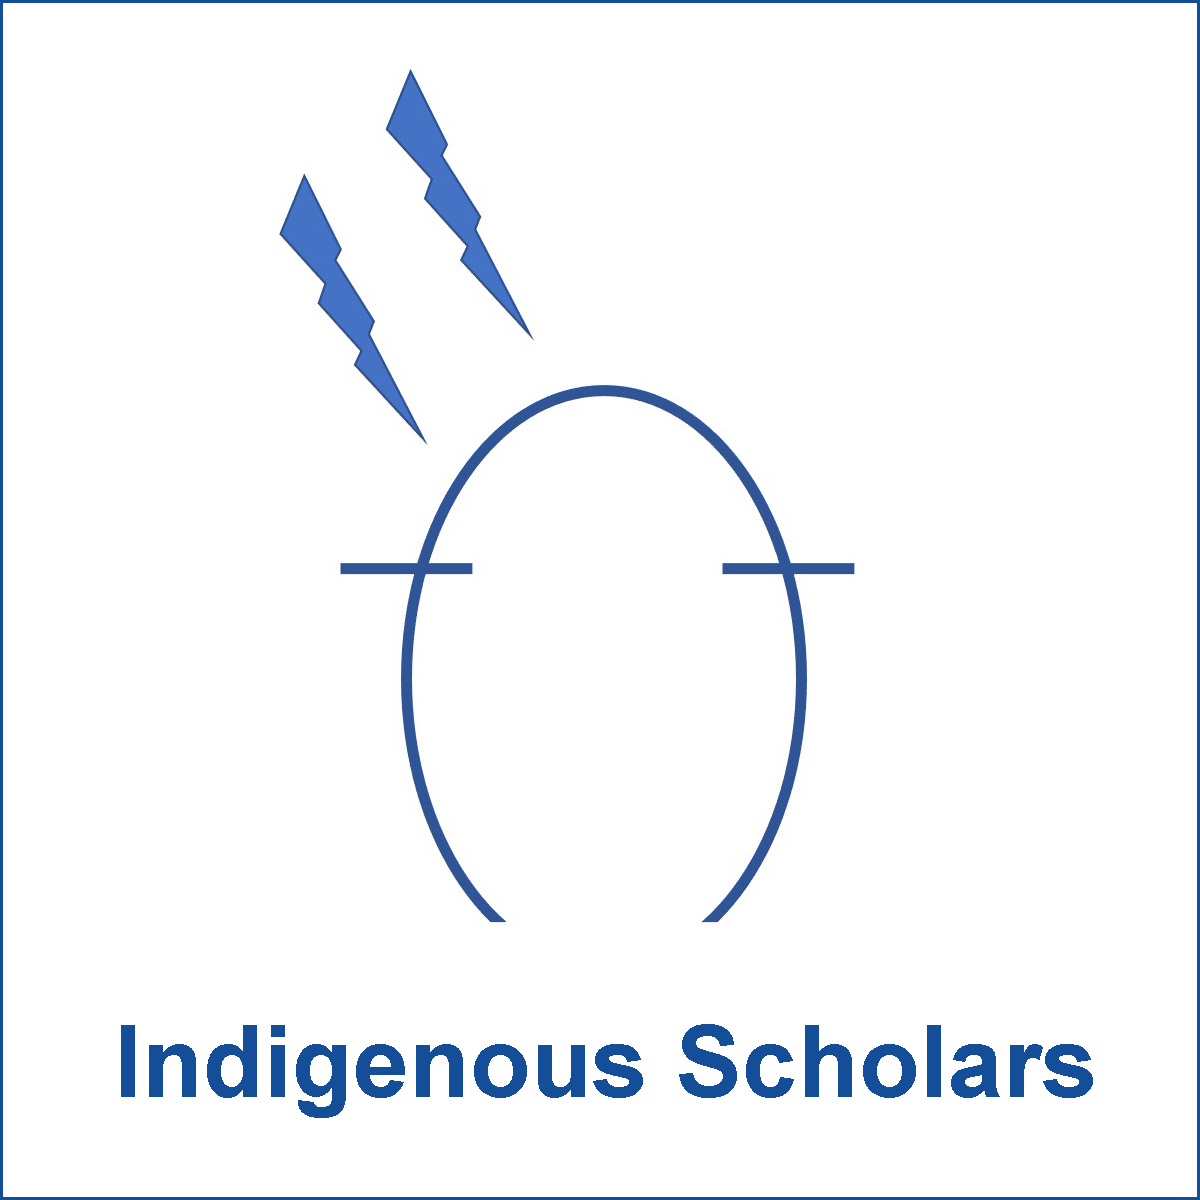 Artwork for the section on Indigenous Scholars in the Saagajiwe Indigenous Knowledges Open Source Encylopedia